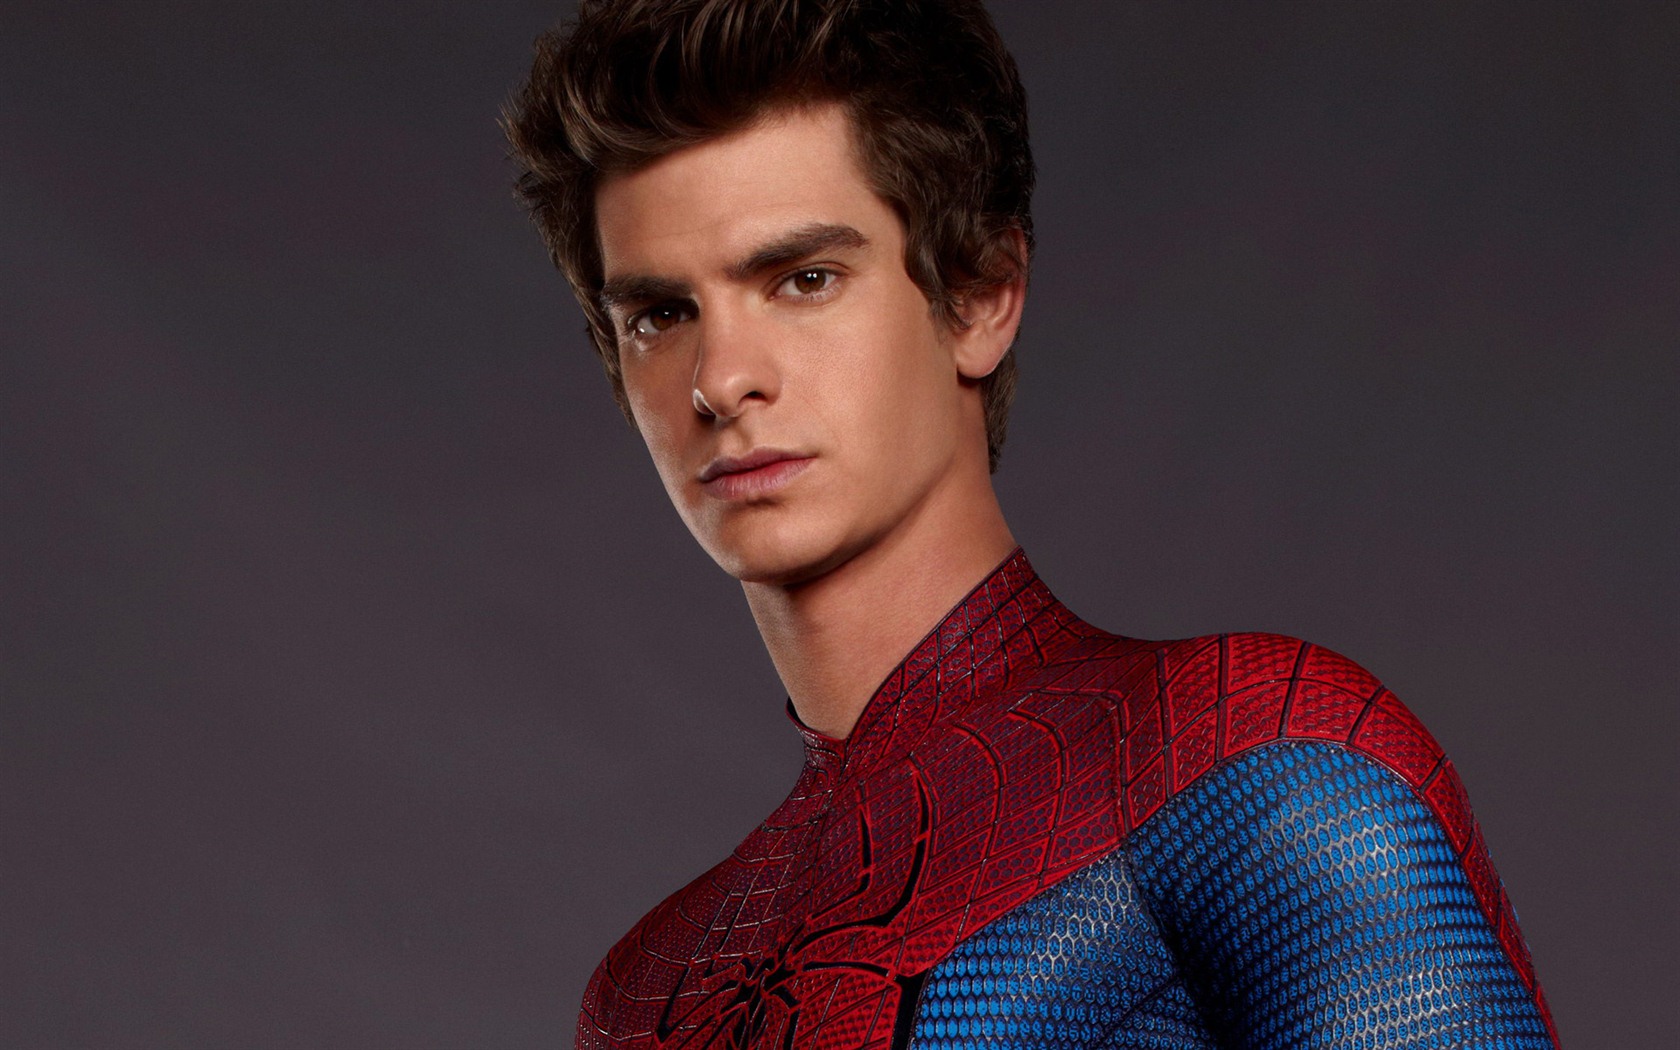 Le 2012 Amazing Spider-Man wallpapers #2 - 1680x1050